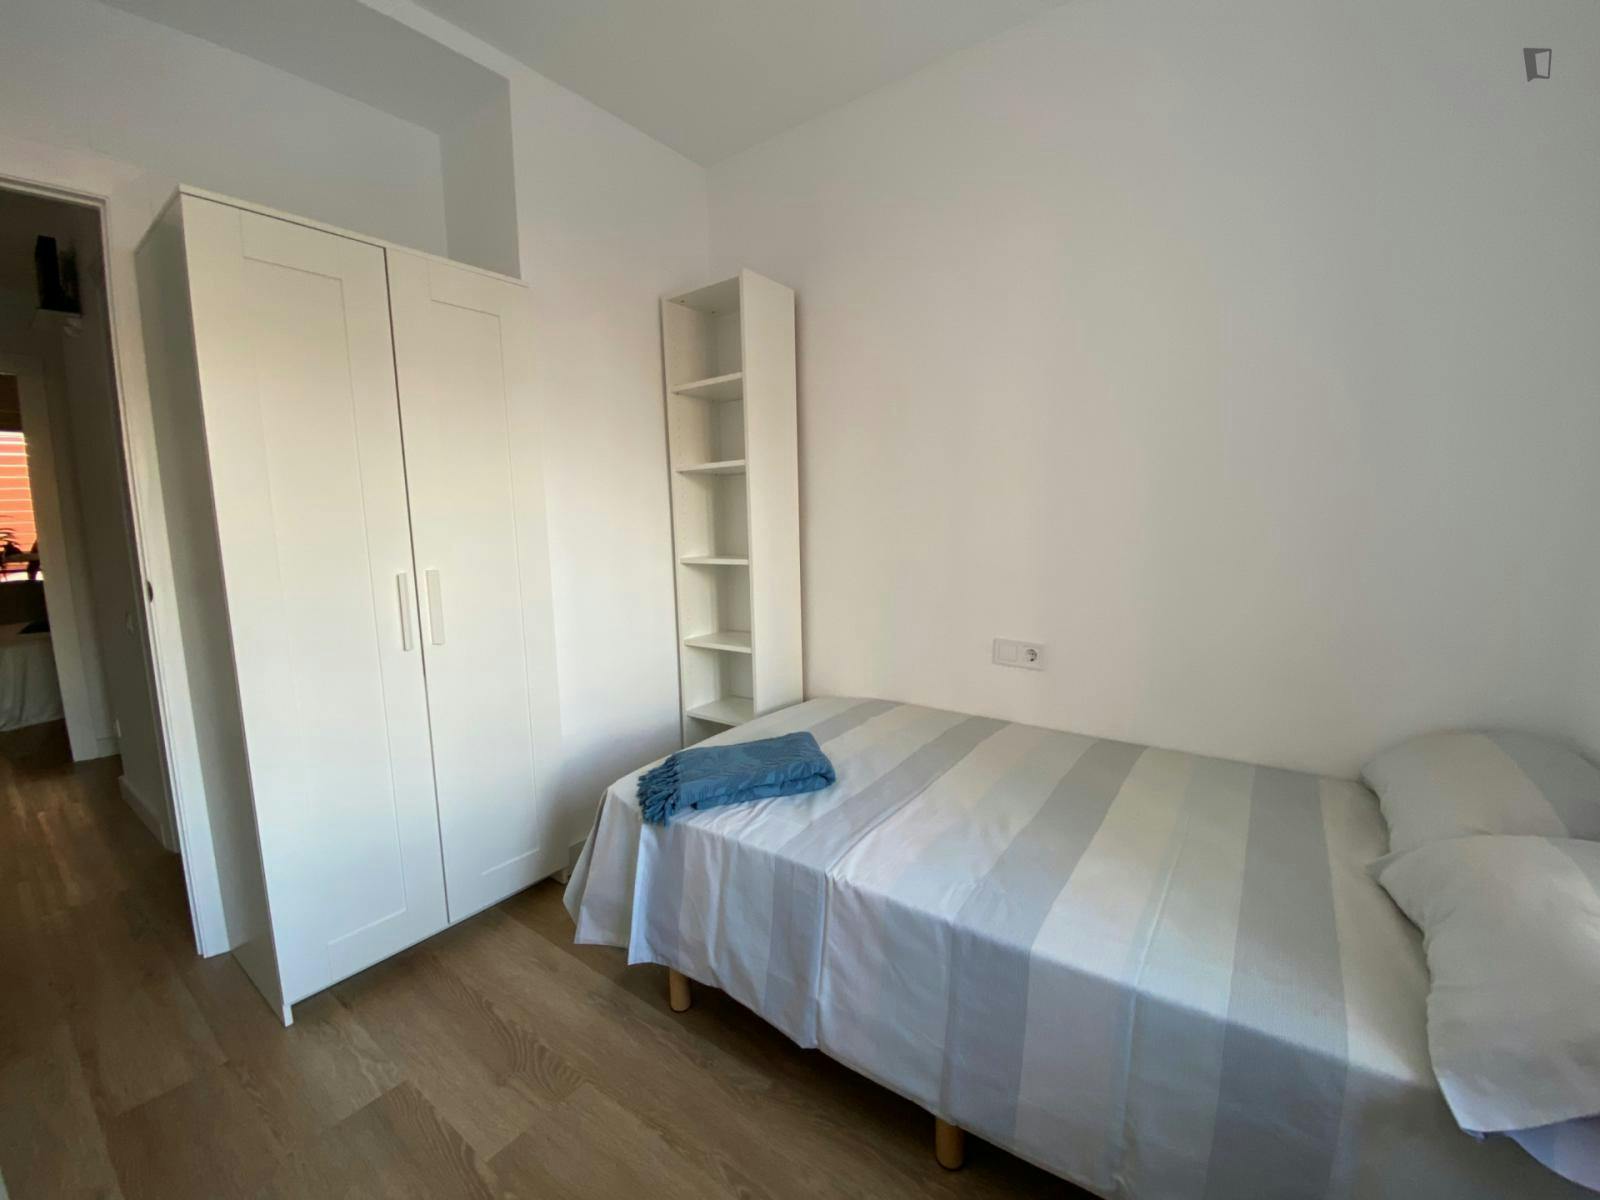 GREAT BRIGHT Bedroom in BEST LOCATION and FULLY RENOVATED Apartment